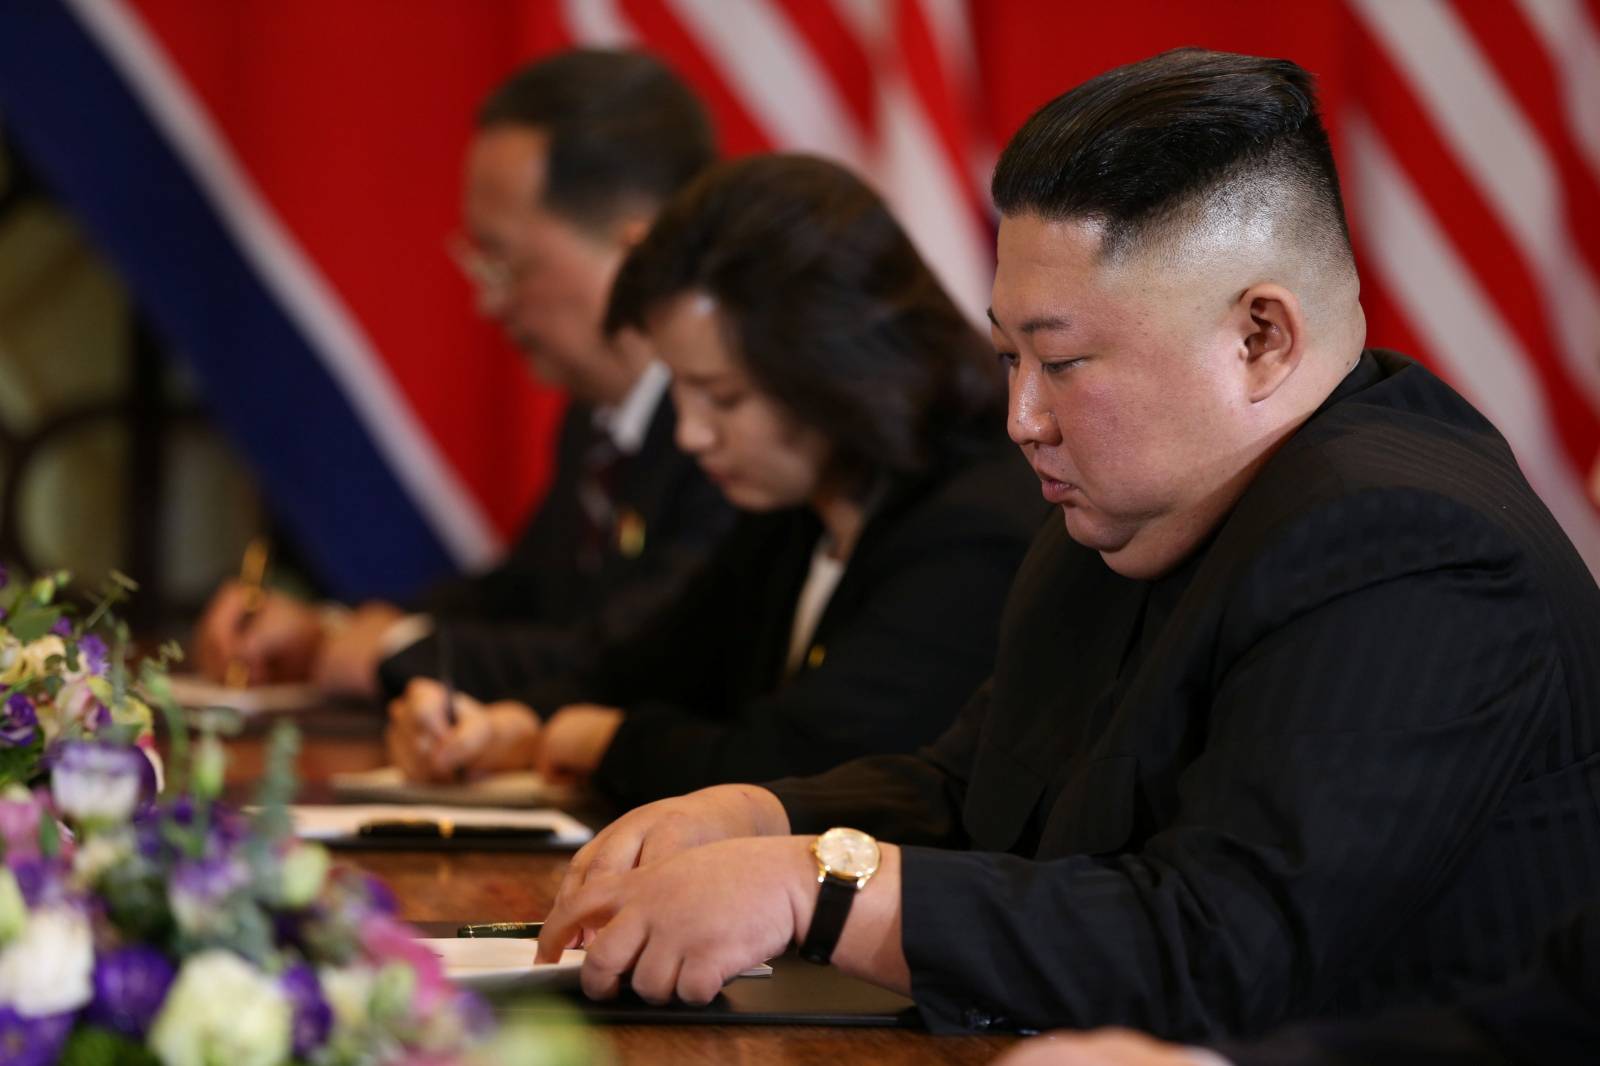 North Korea's leader Kim Jong Un attends the extended bilateral meeting in the Metropole hotel during the second North Korea-U.S. summit in Hanoi